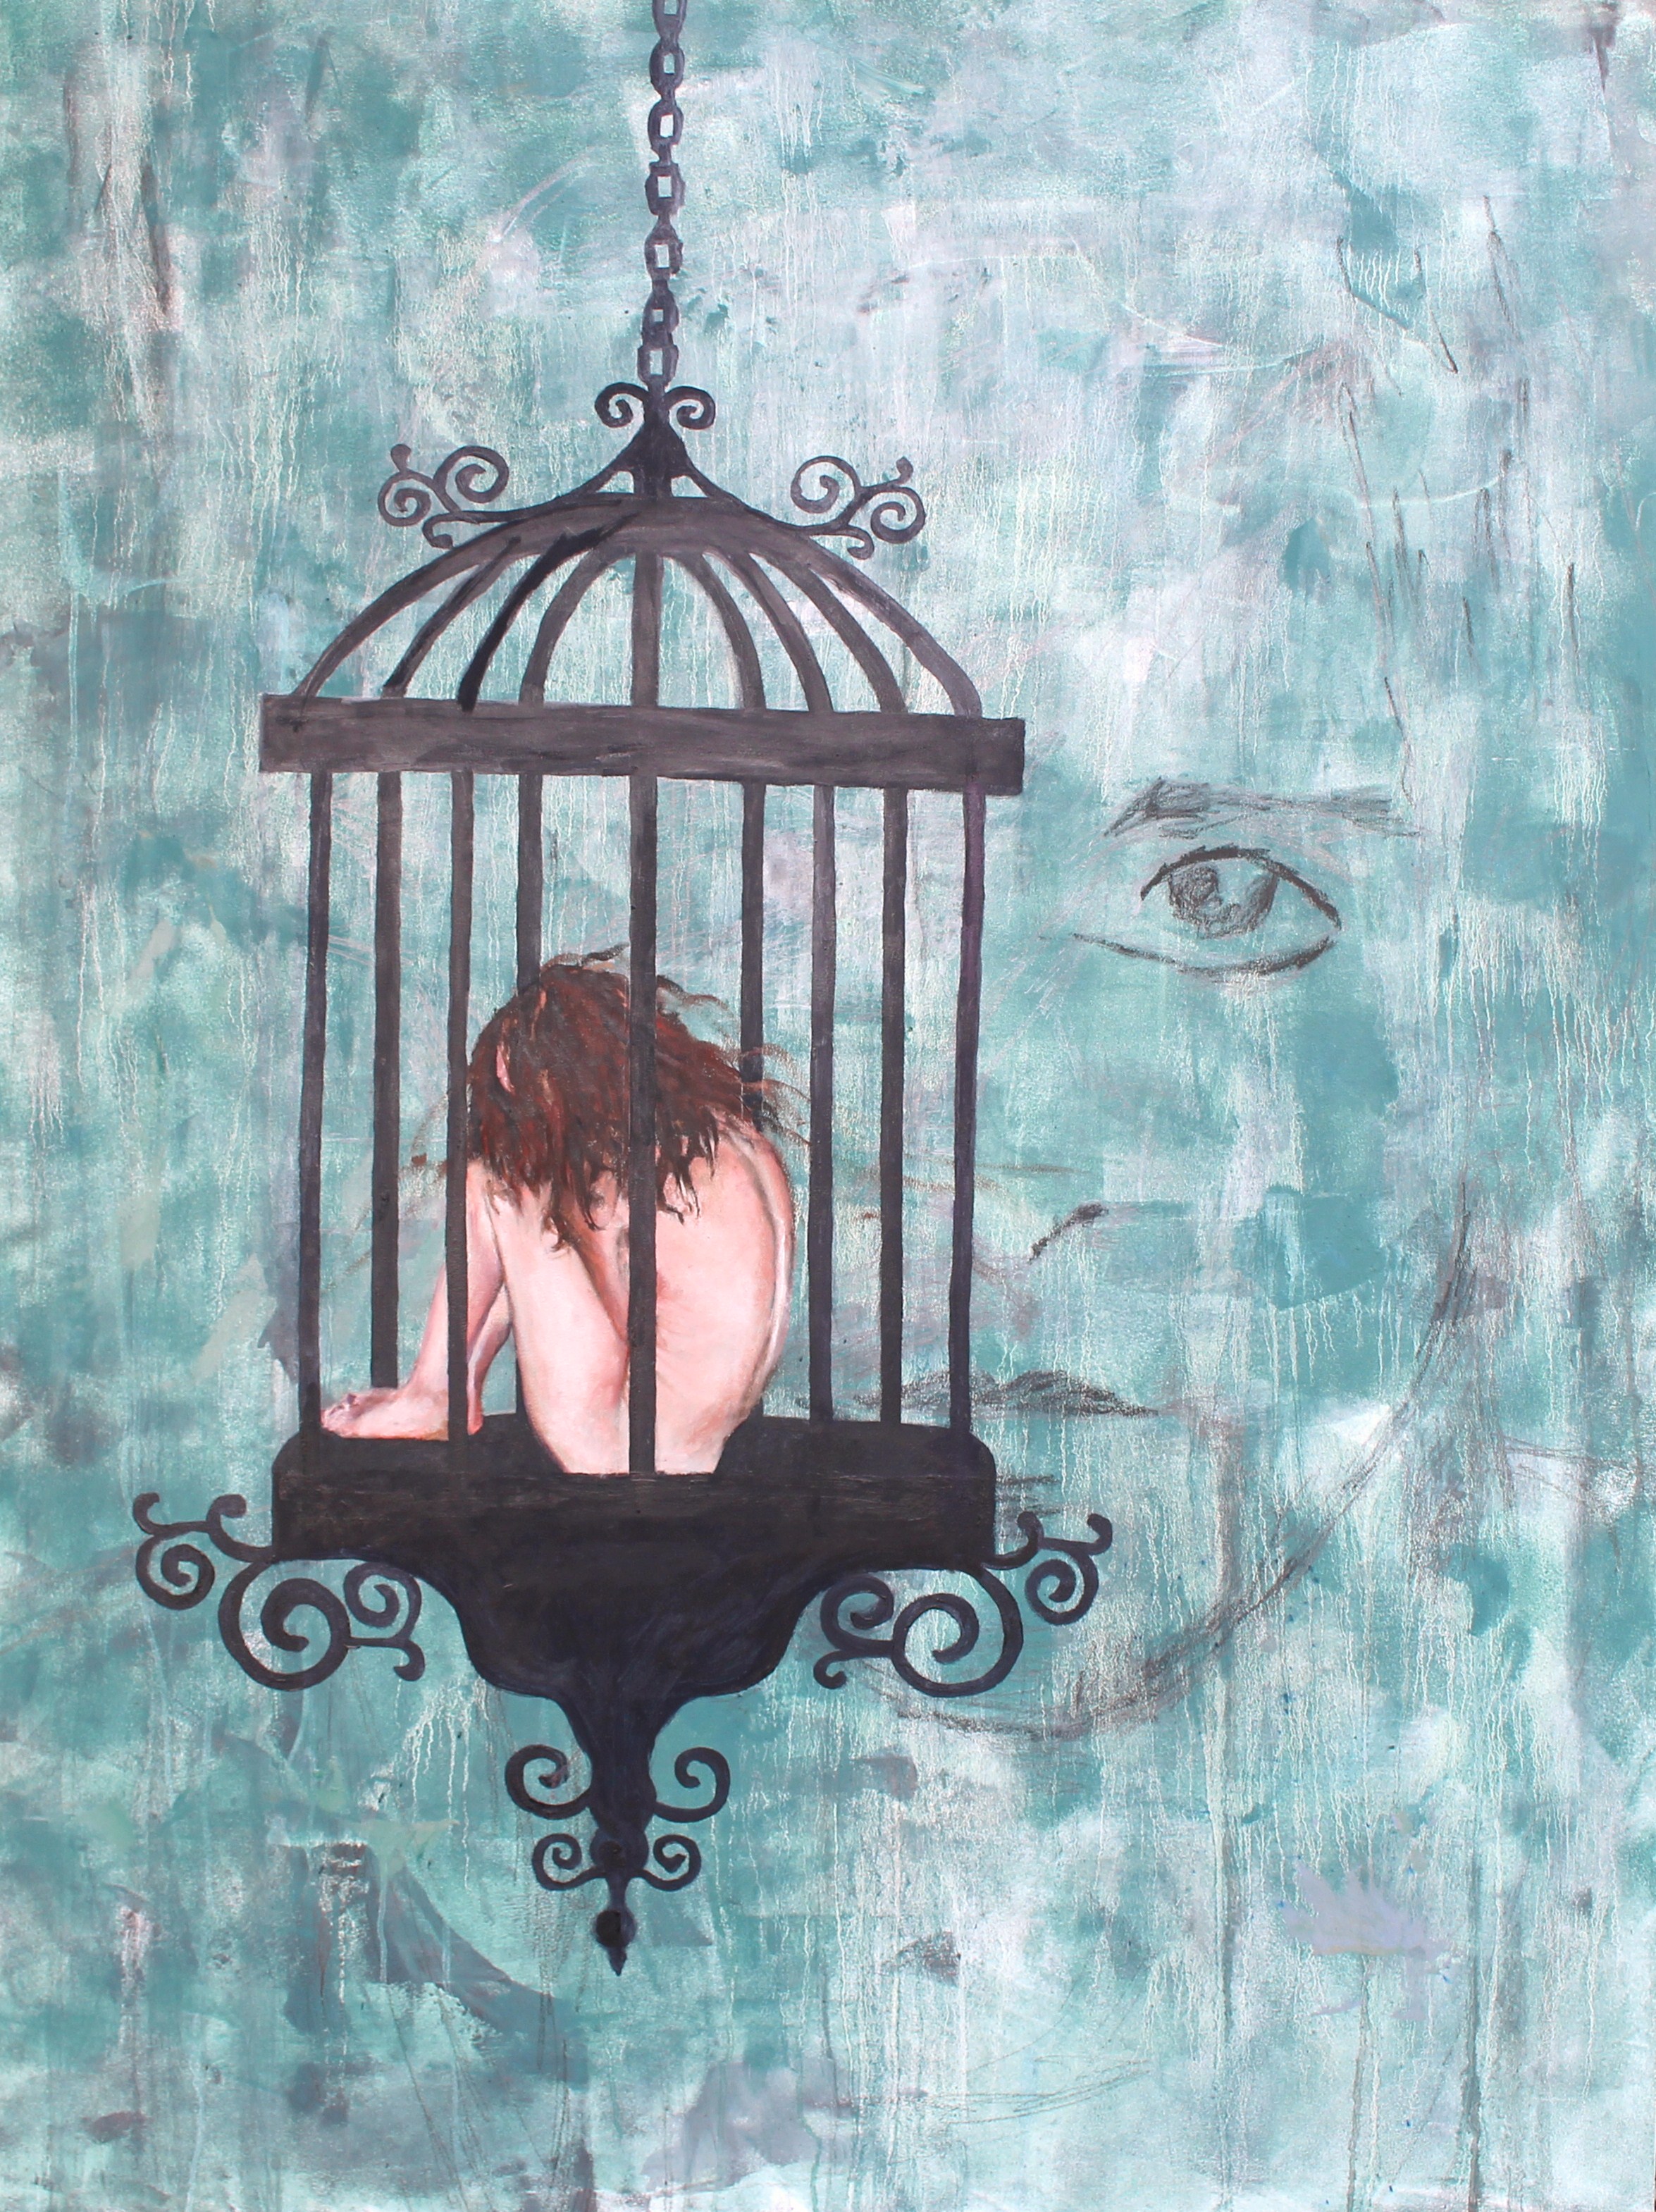 Caged Bird 36x48 Oil On Wood Commissioned for Public Display